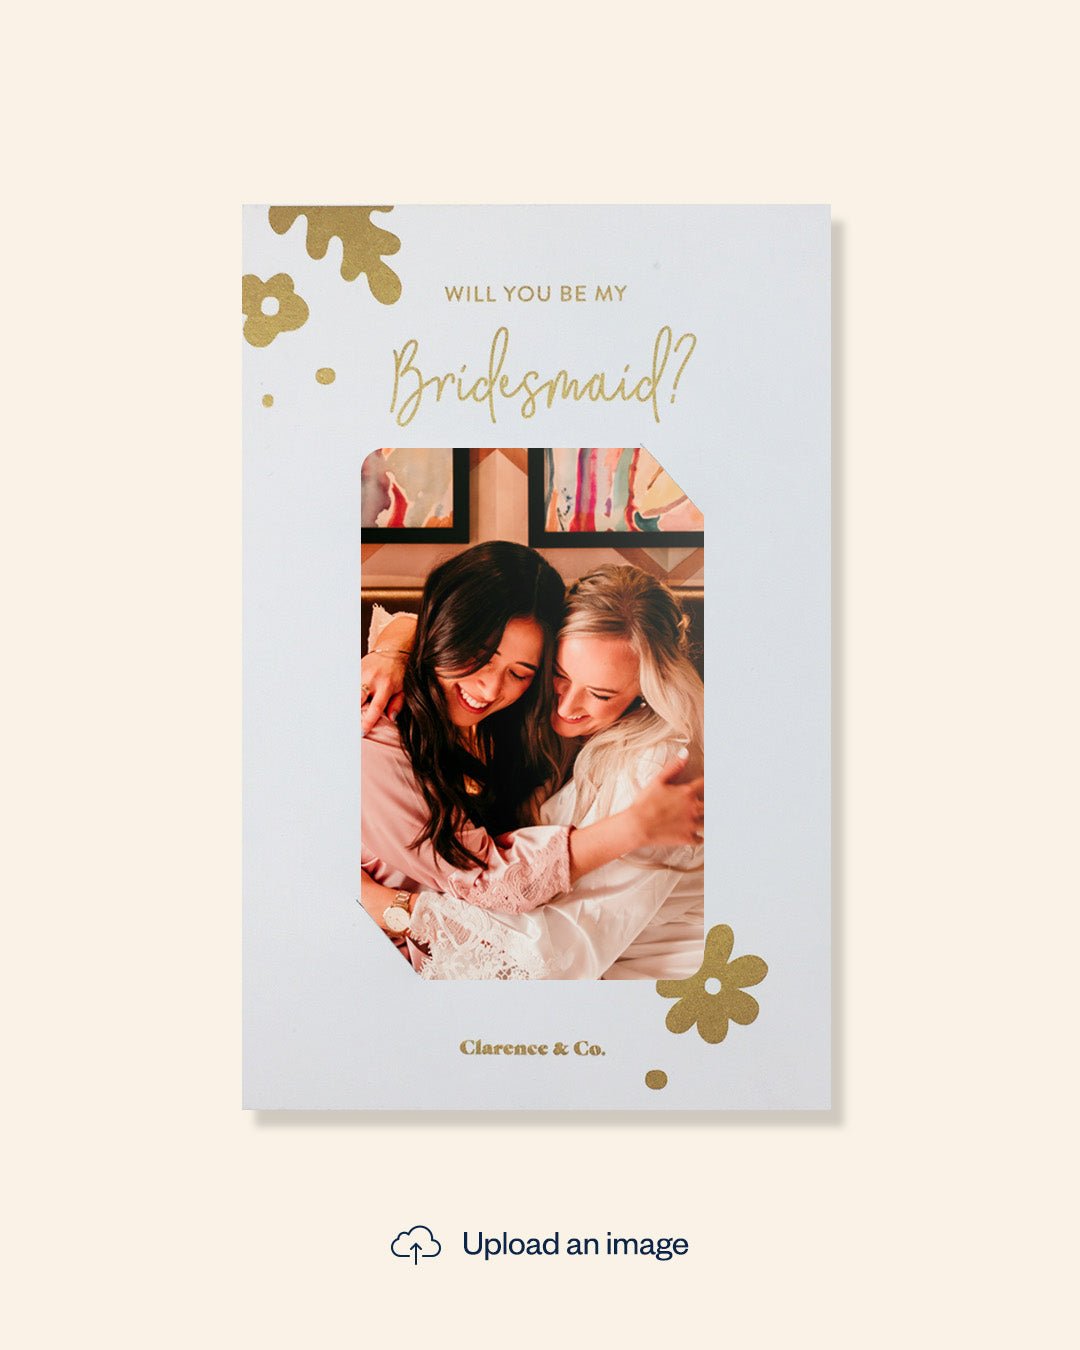 Will you be my bridesmaid card NZ